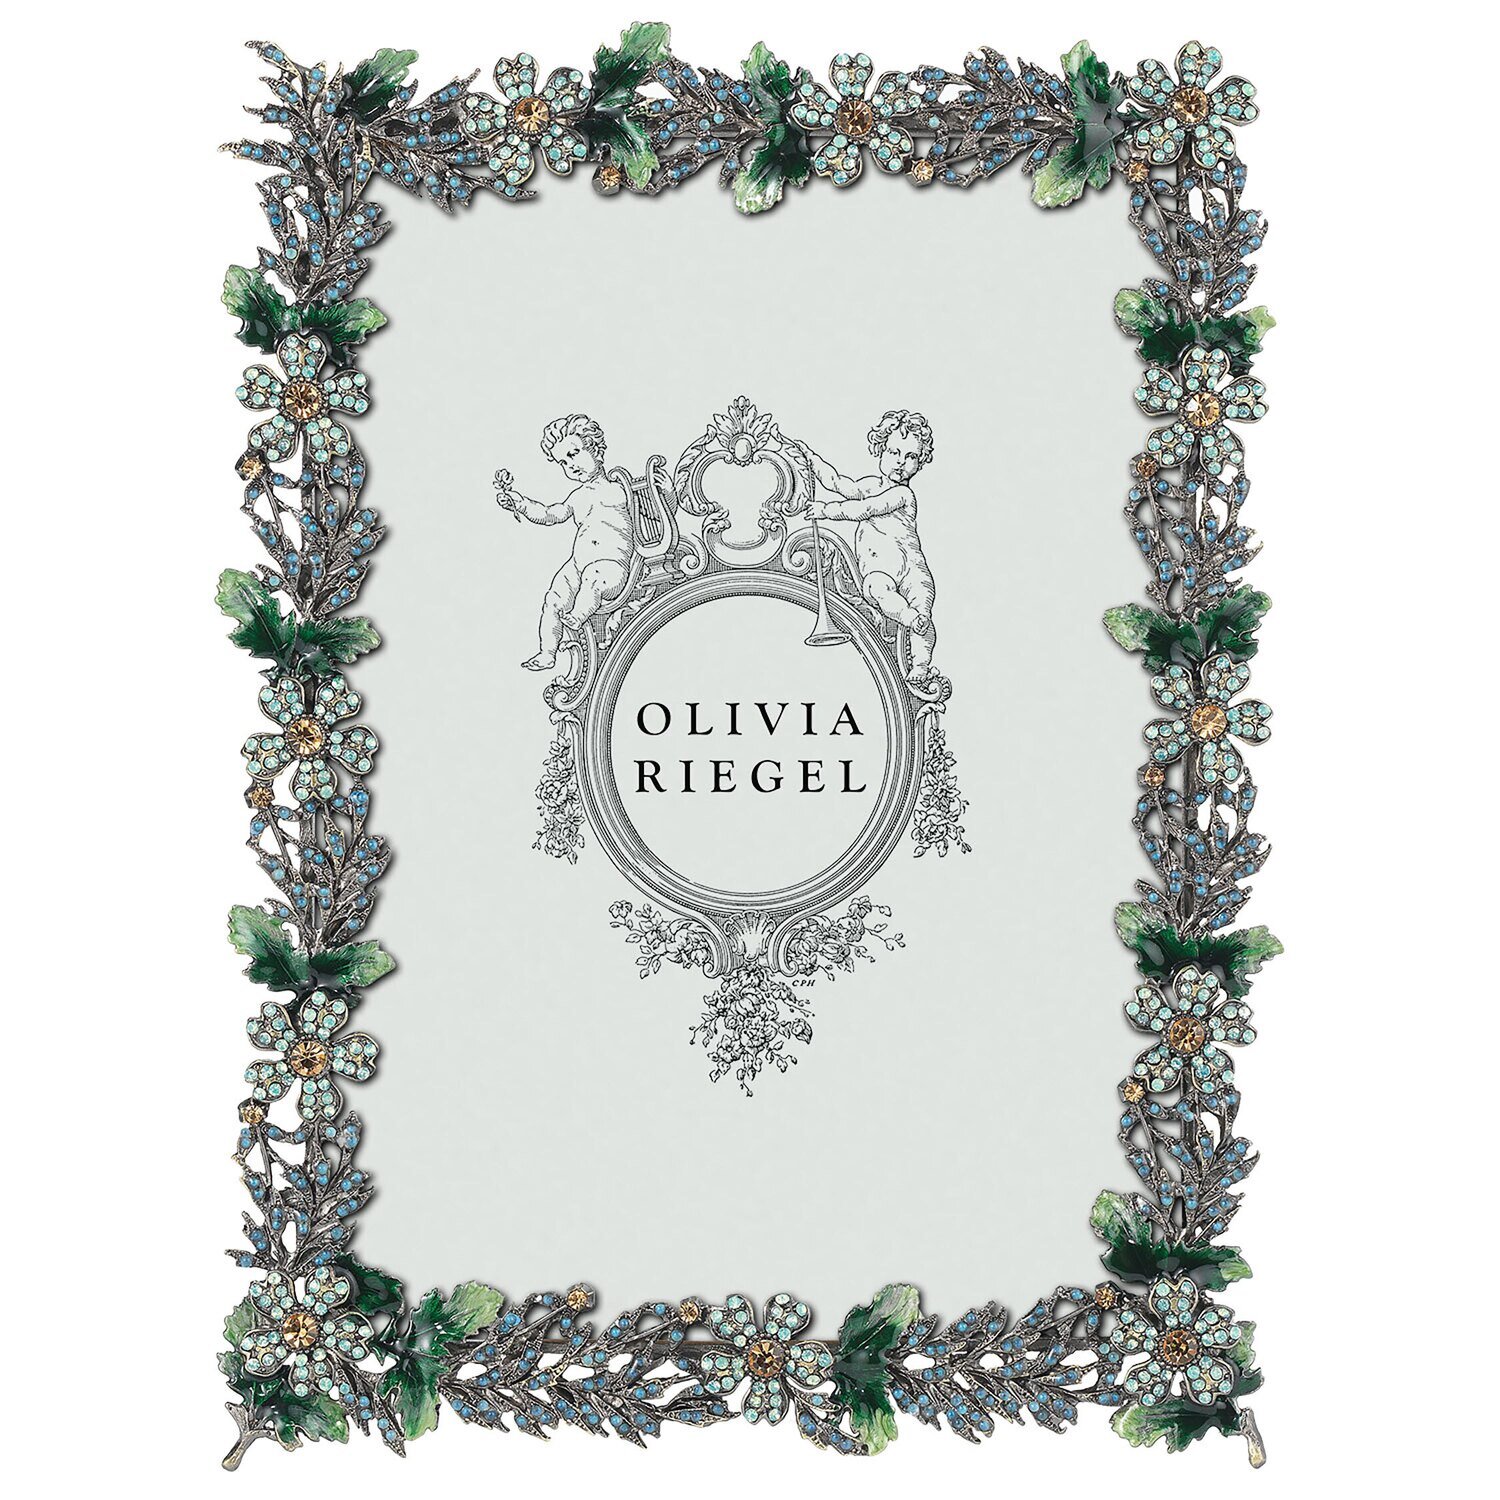 Olivia Riegel Edelweiss 5 x 7 Inch Picture Frame RT1431